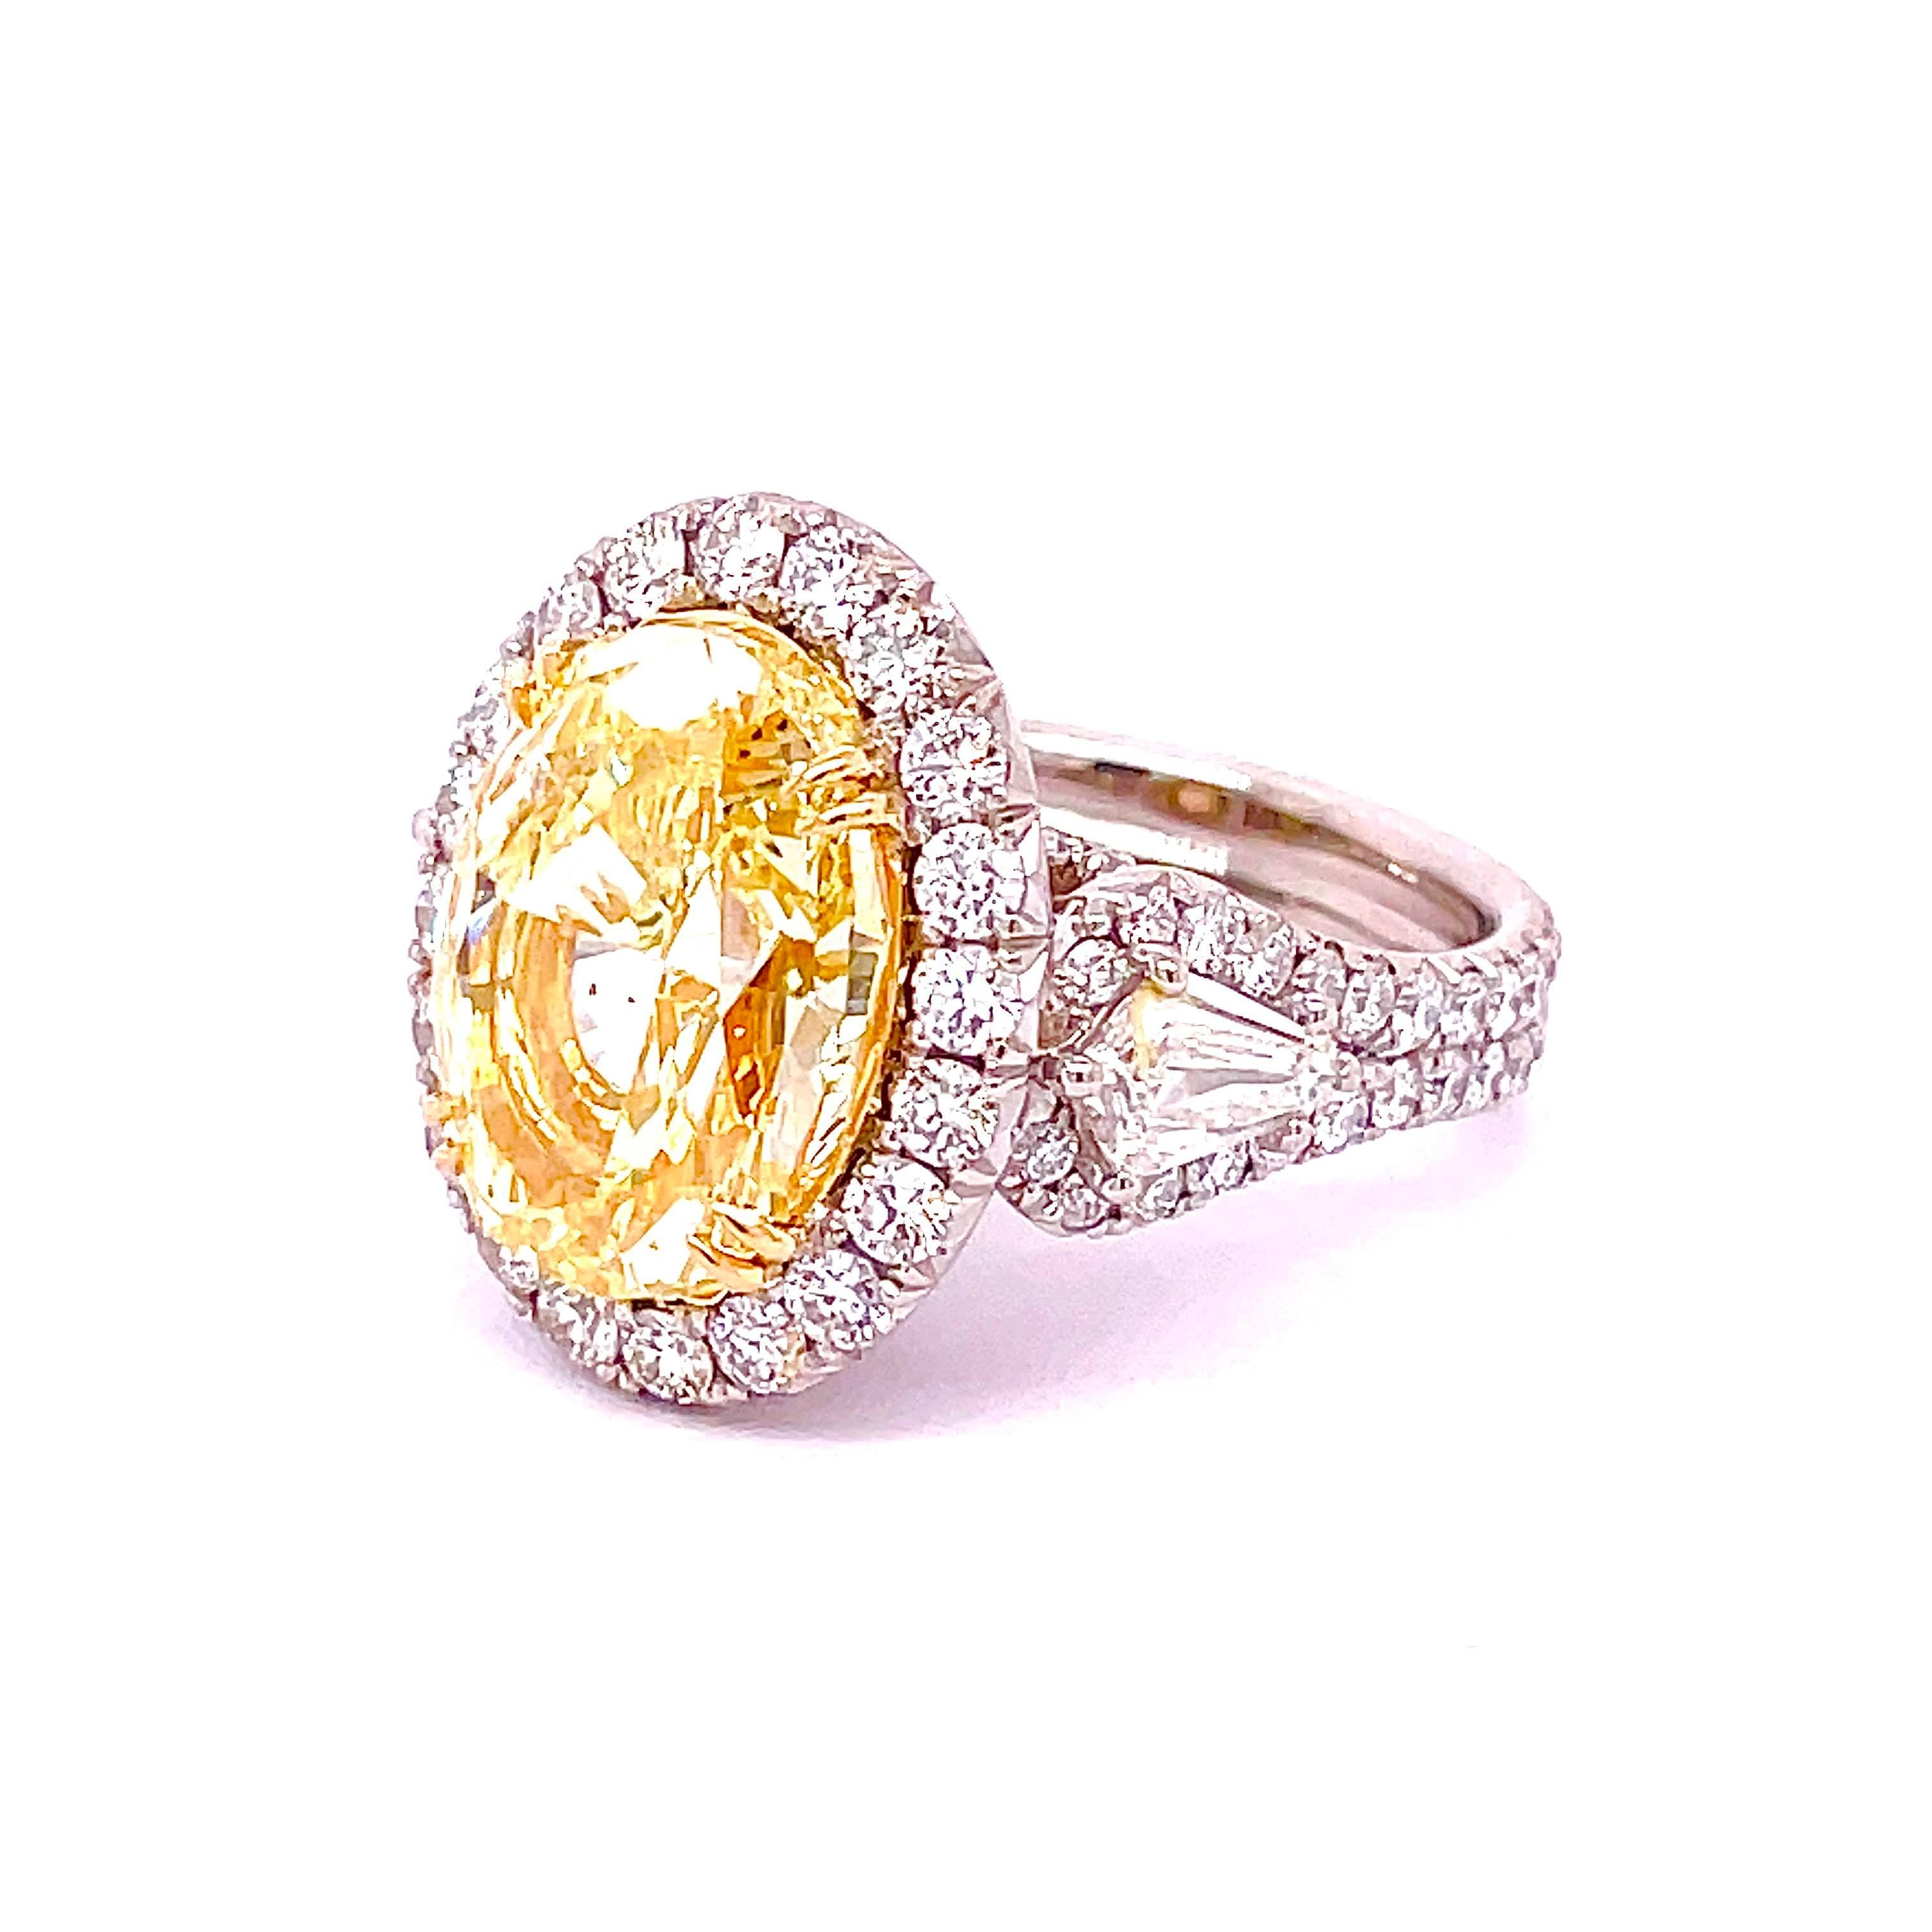 GIA Certified Oval Shape Diamond 8.32, Fancy Yellow Color SI1 Clarity mounted elegantly on a 18K Yellow basket with claw prongs and a Platinum halo & shank filled with 1.93 carat of fine round diamonds. Adding 0.86 carat Shield Cut diamonds on each